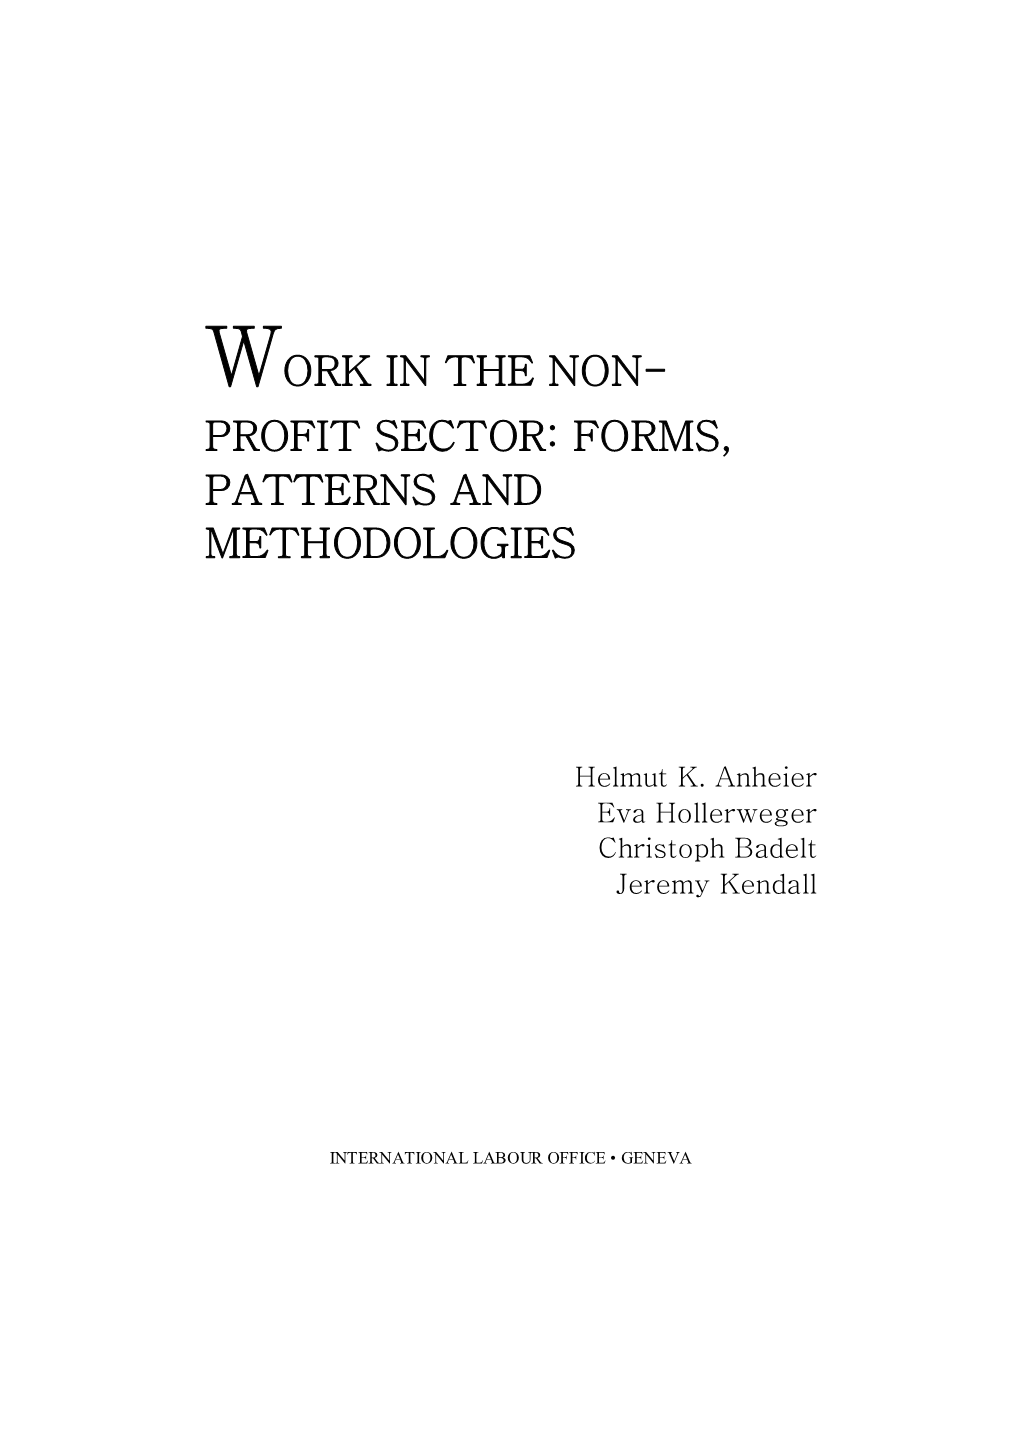 Work in the Non- Profit Sector: Forms, Patterns and Methodologies